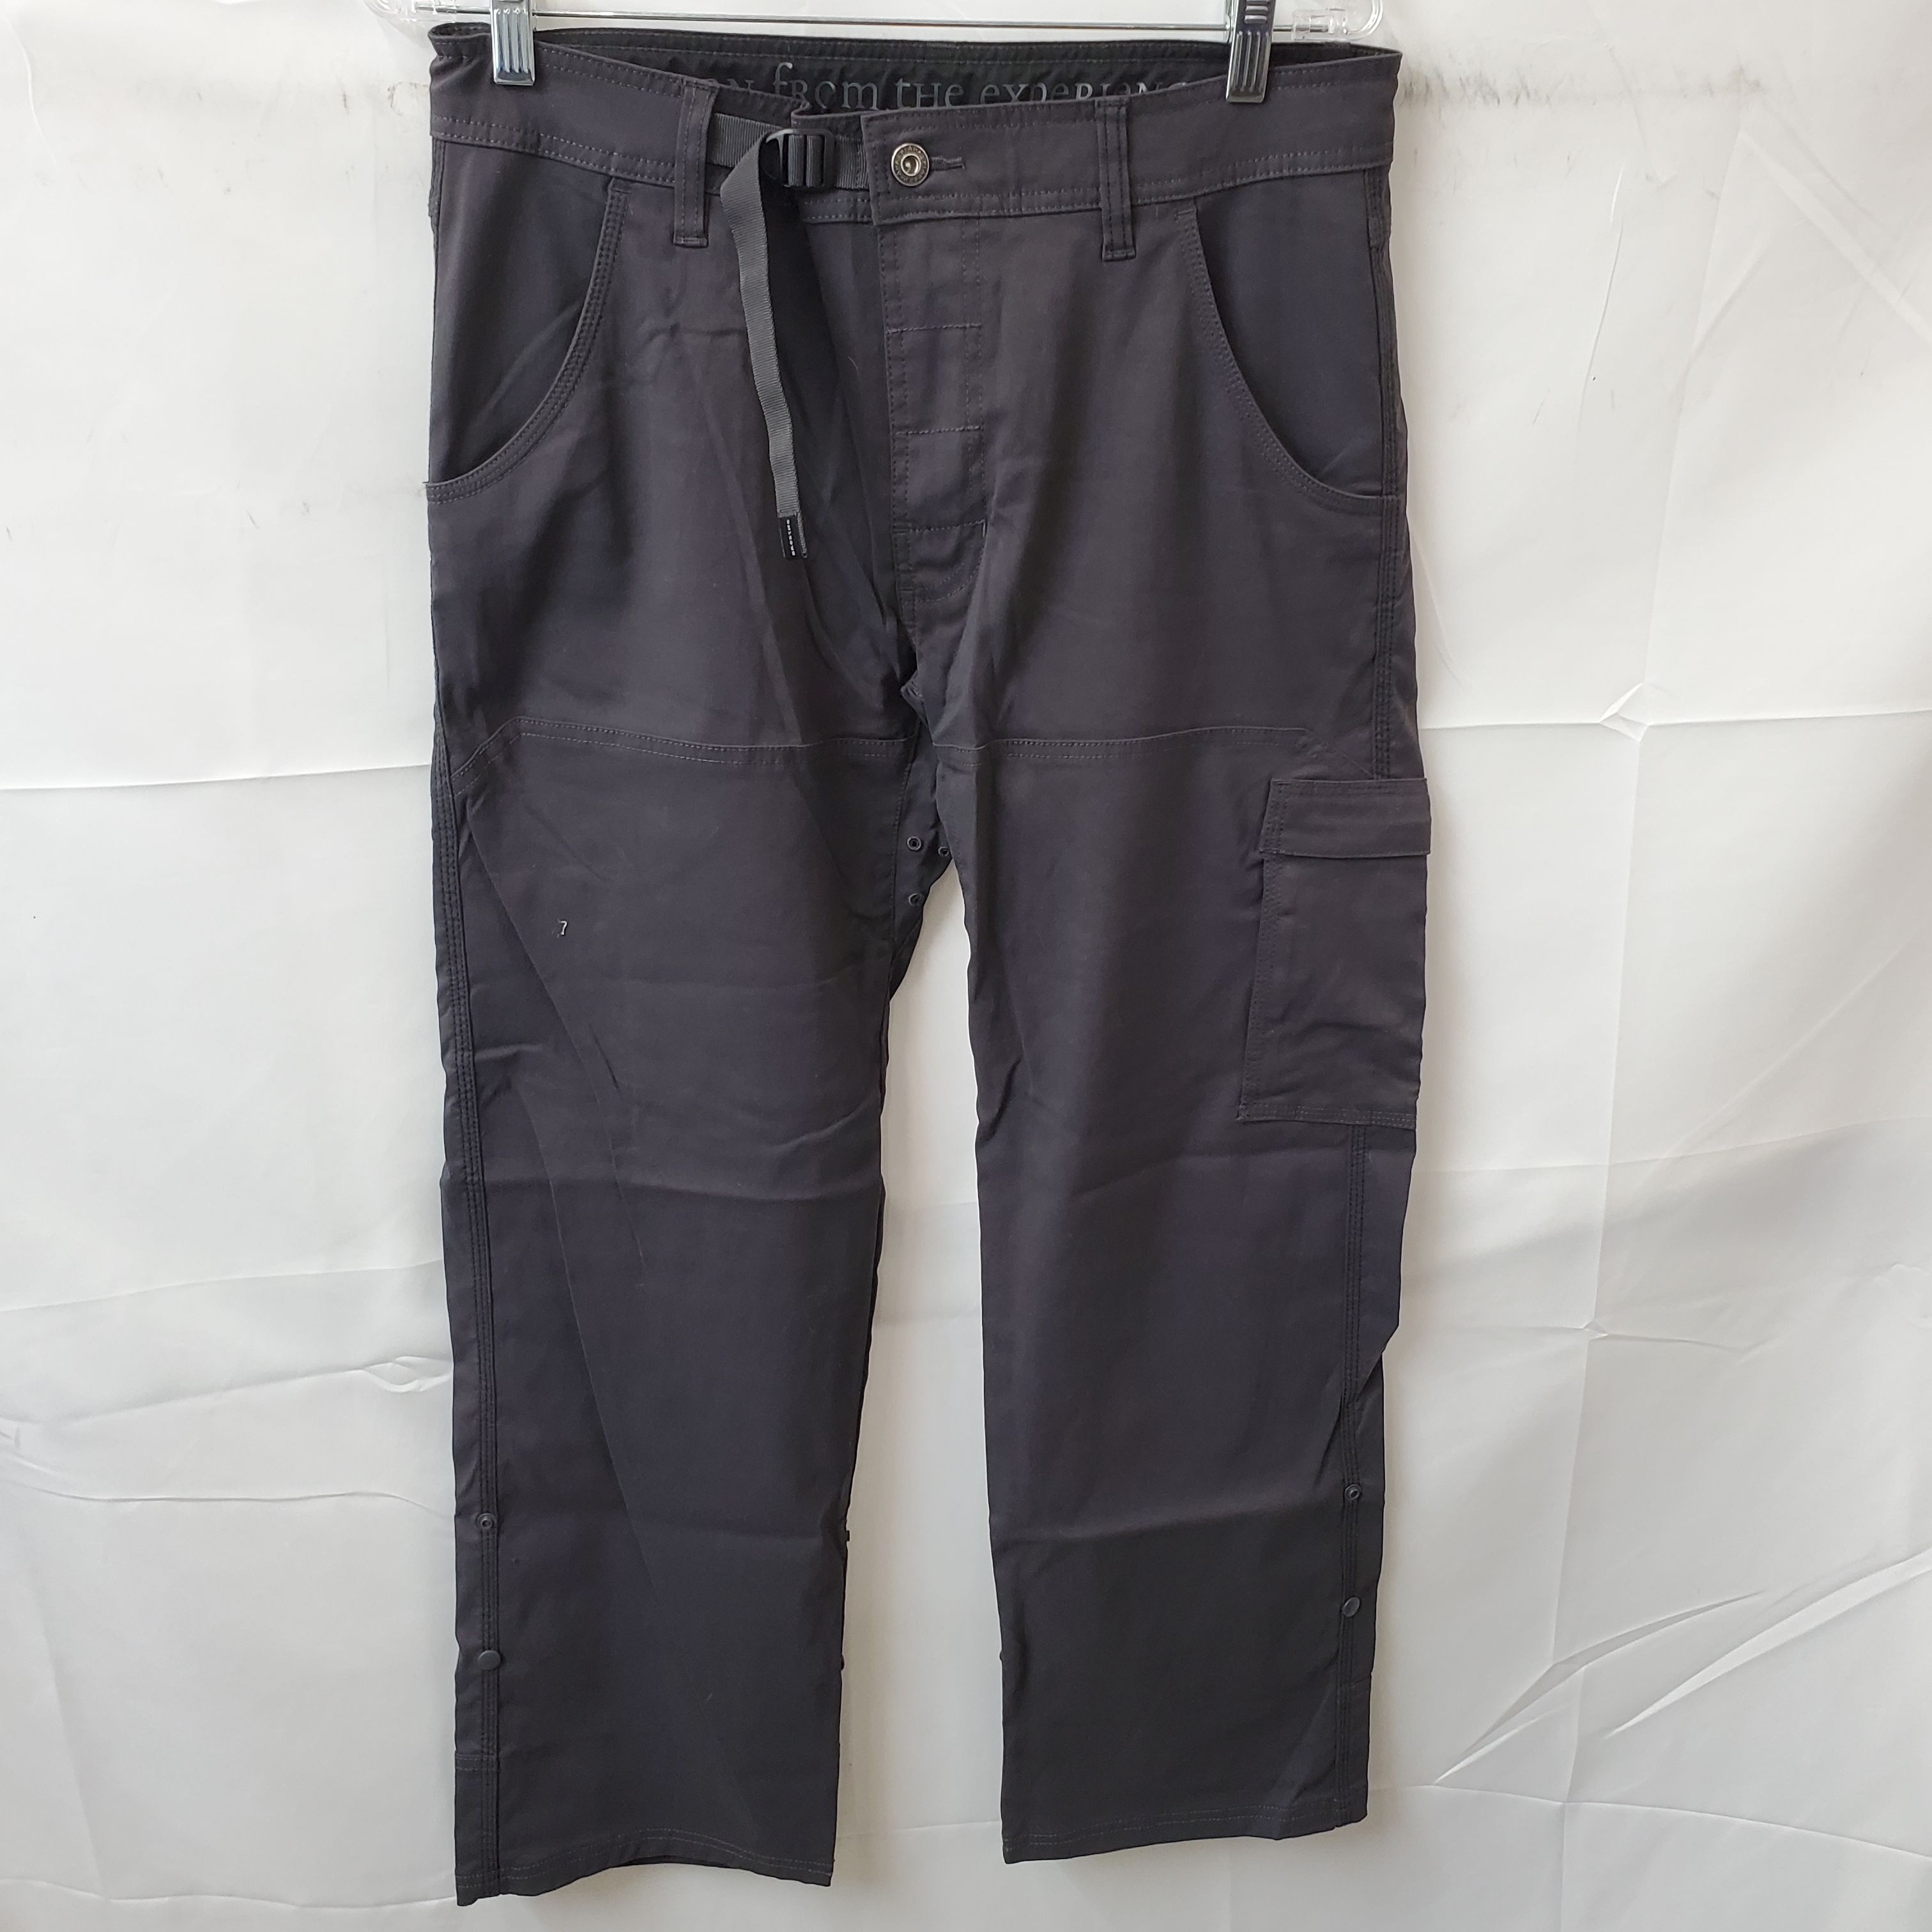 Buy the Prana Taupe Men's Cargo Pants Size 32 w/ Snapping Cuffs ...